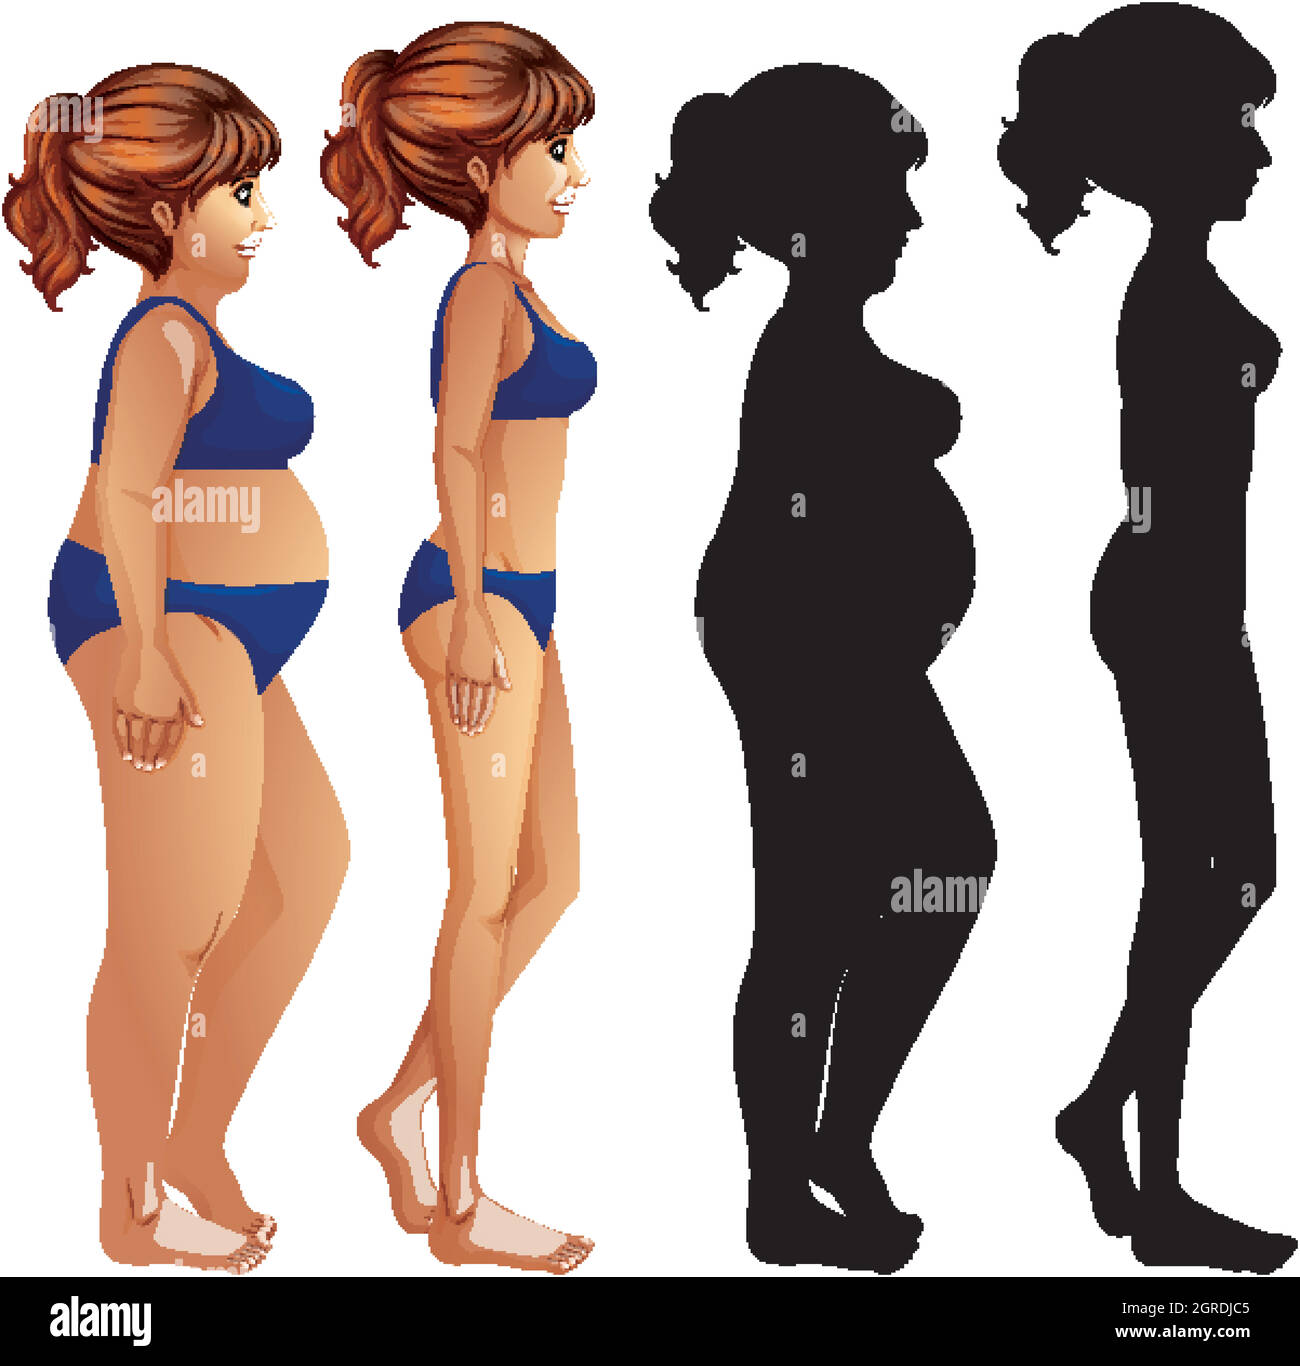 Skinny and fat women with sillhouette on white background Stock Vector